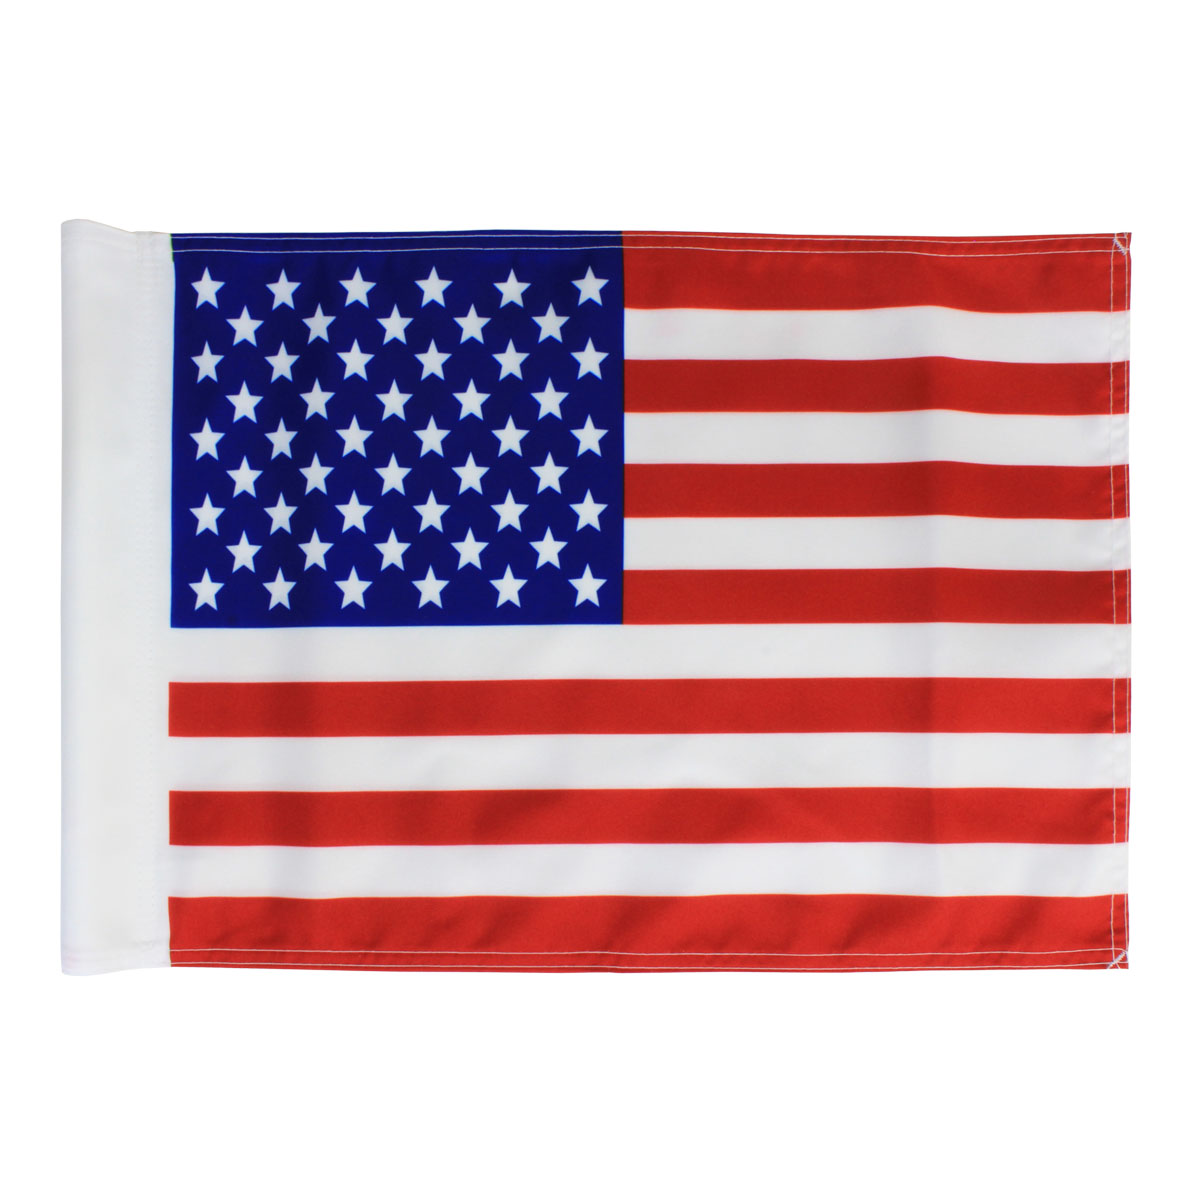 Flush Wall Mount Flagpole Holder with American Flag